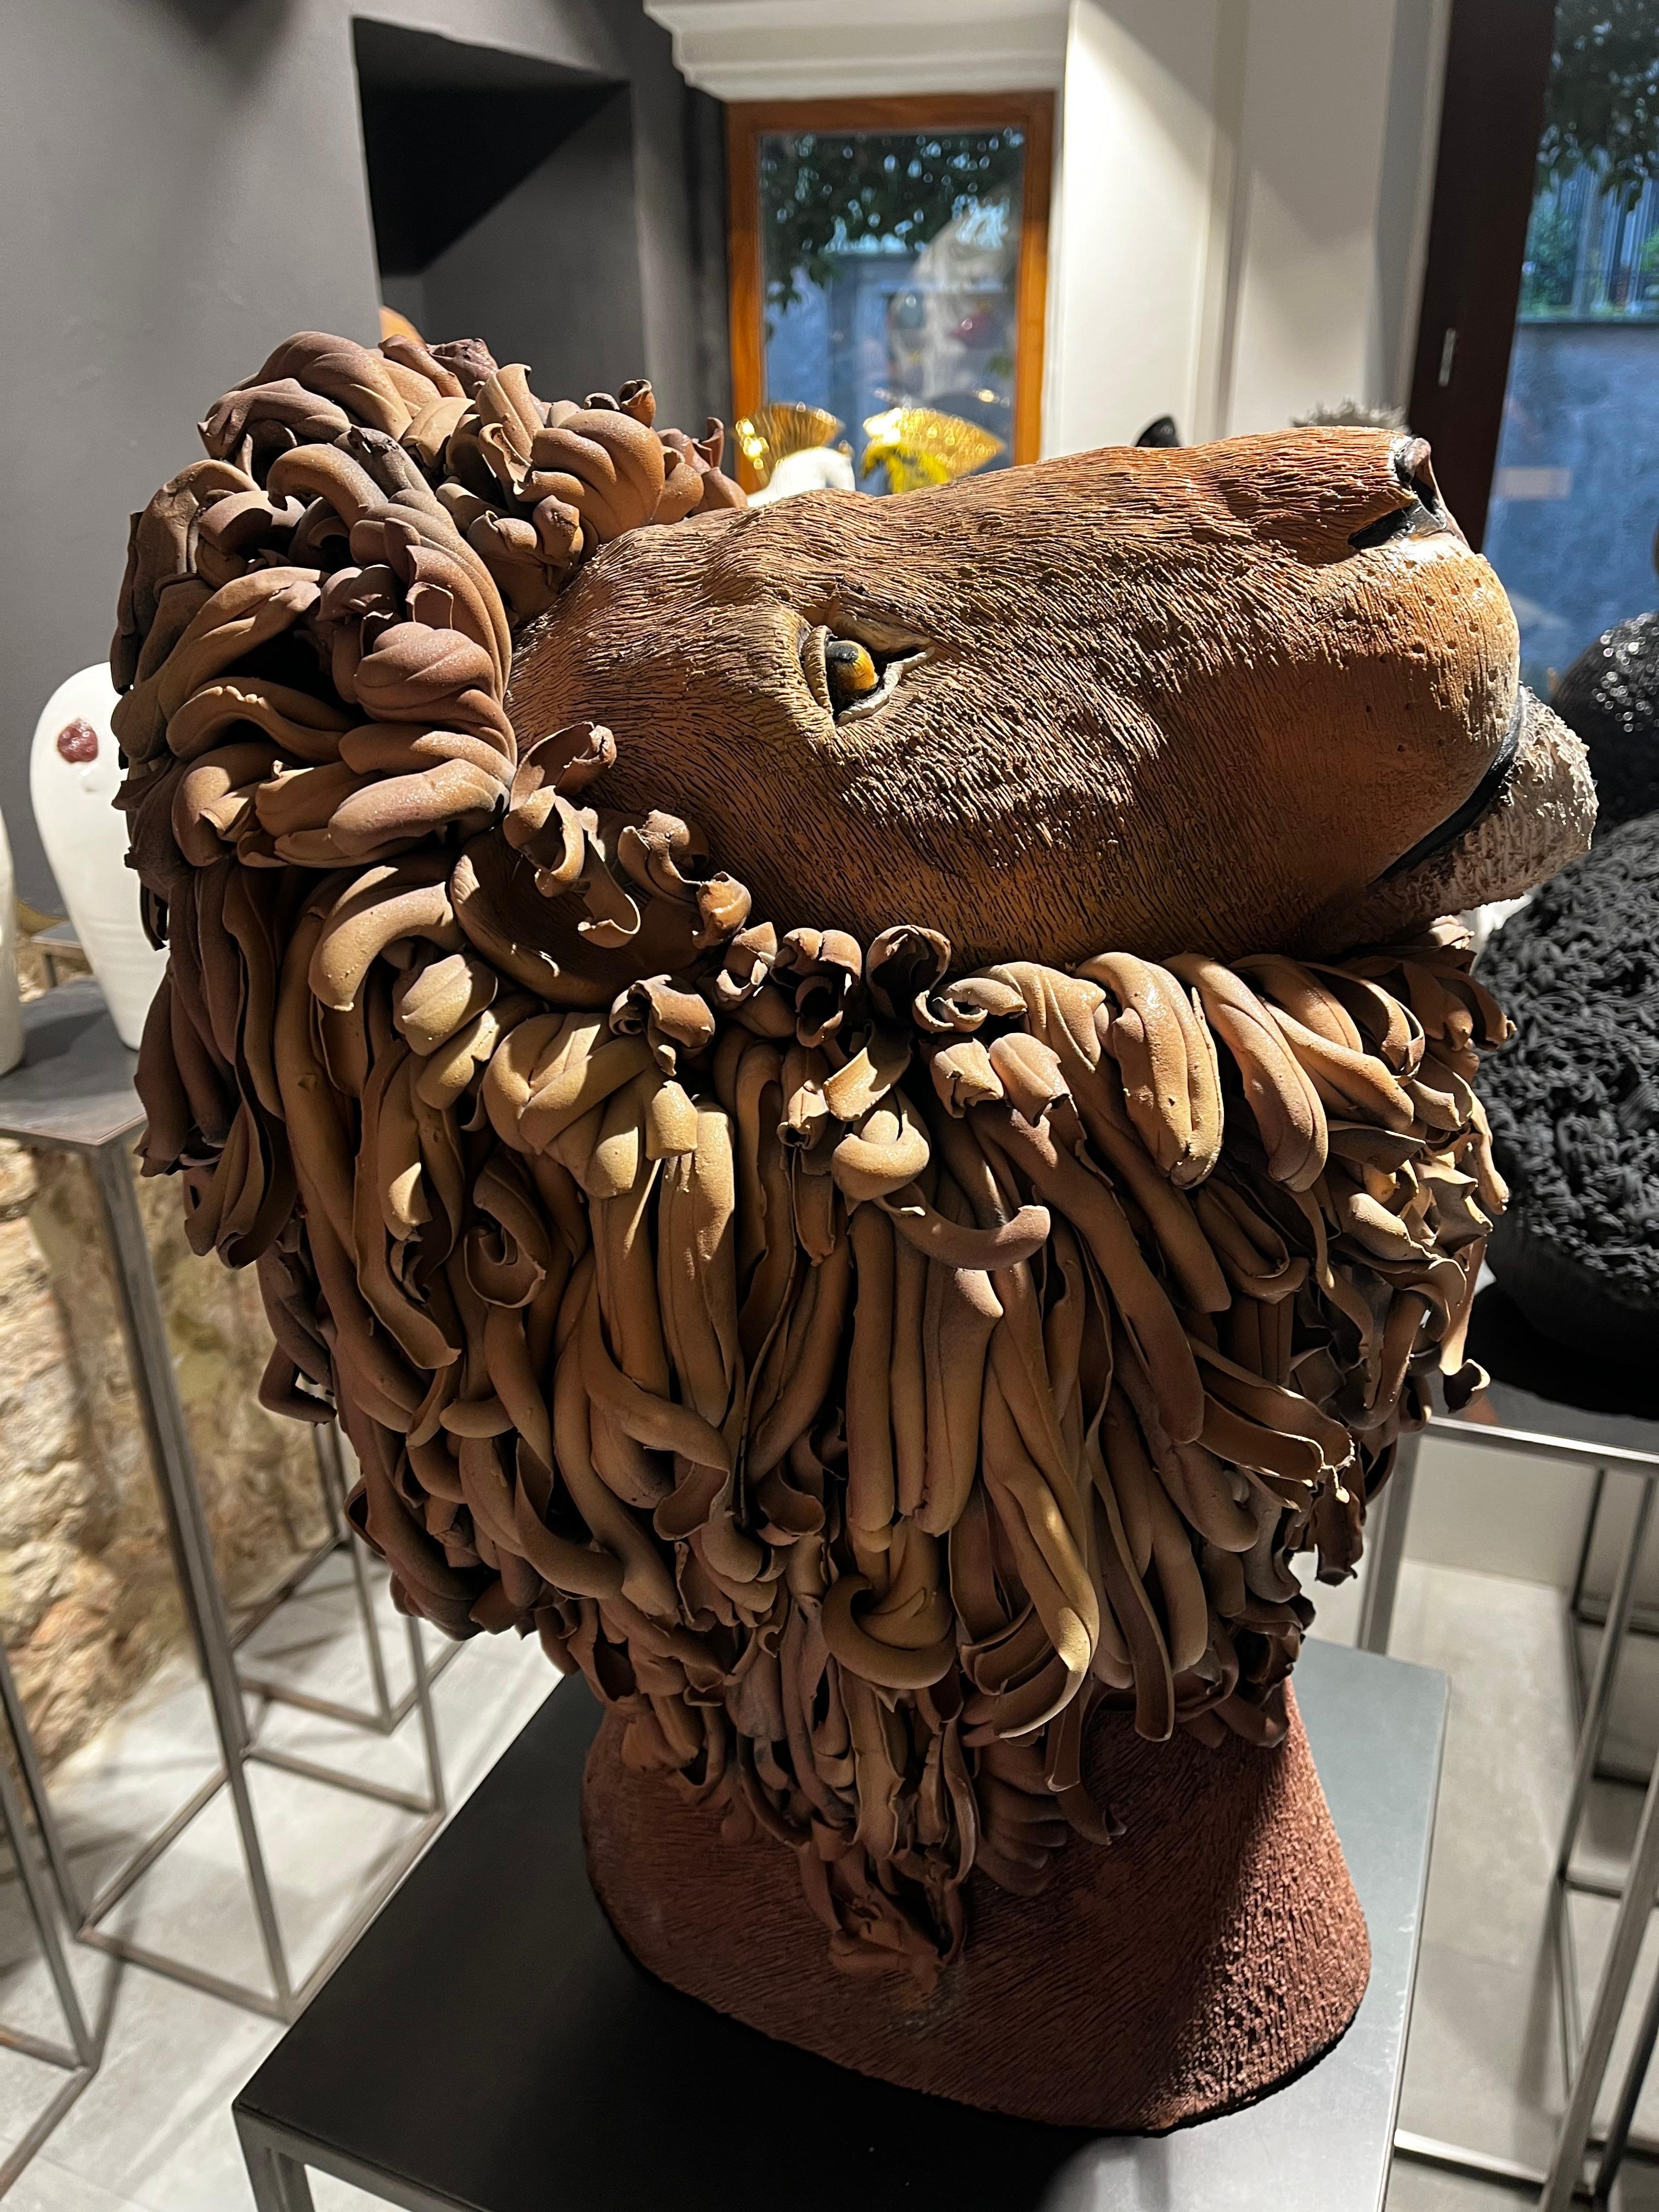 Hand-Crafted Brown Lion Ceramic Sculpture Centerpiece, Completely Handmade Without Mold. 2023 For Sale